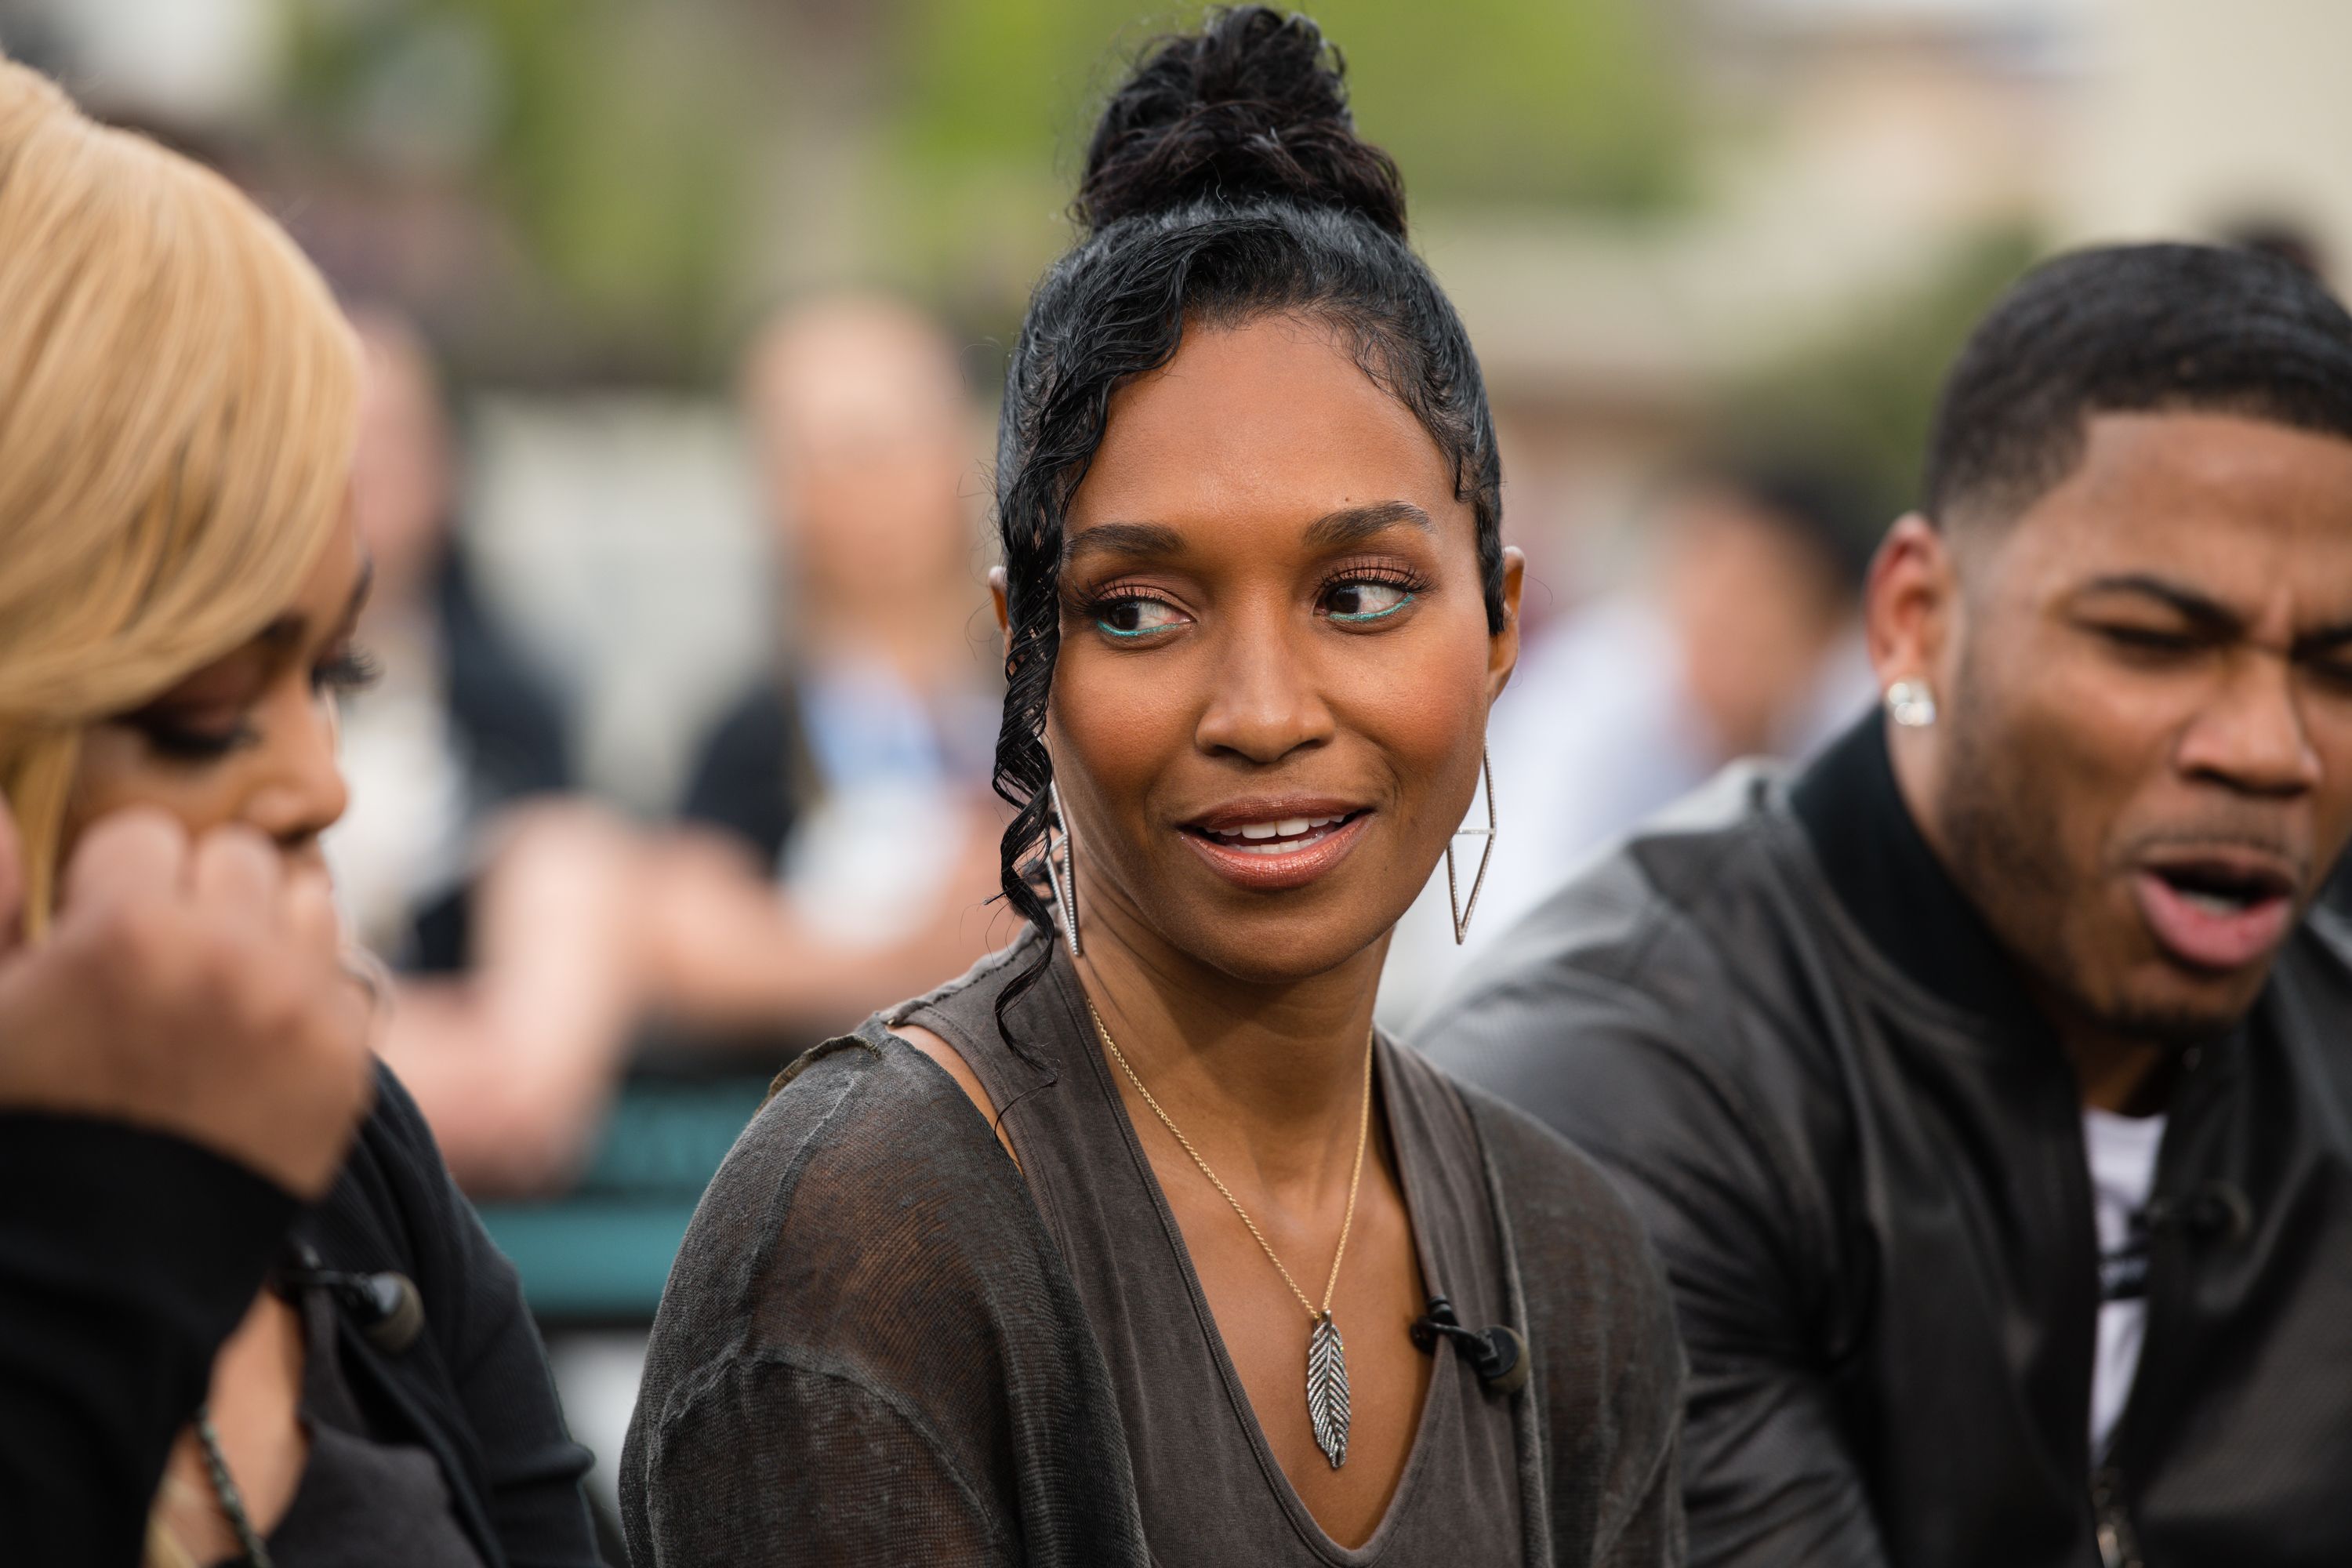 Rozonda 'Chilli' Thomas drops by "Extra" at Universal Studios Hollywood on May 15, 2019, in Universal City, California. | Source: Getty Images